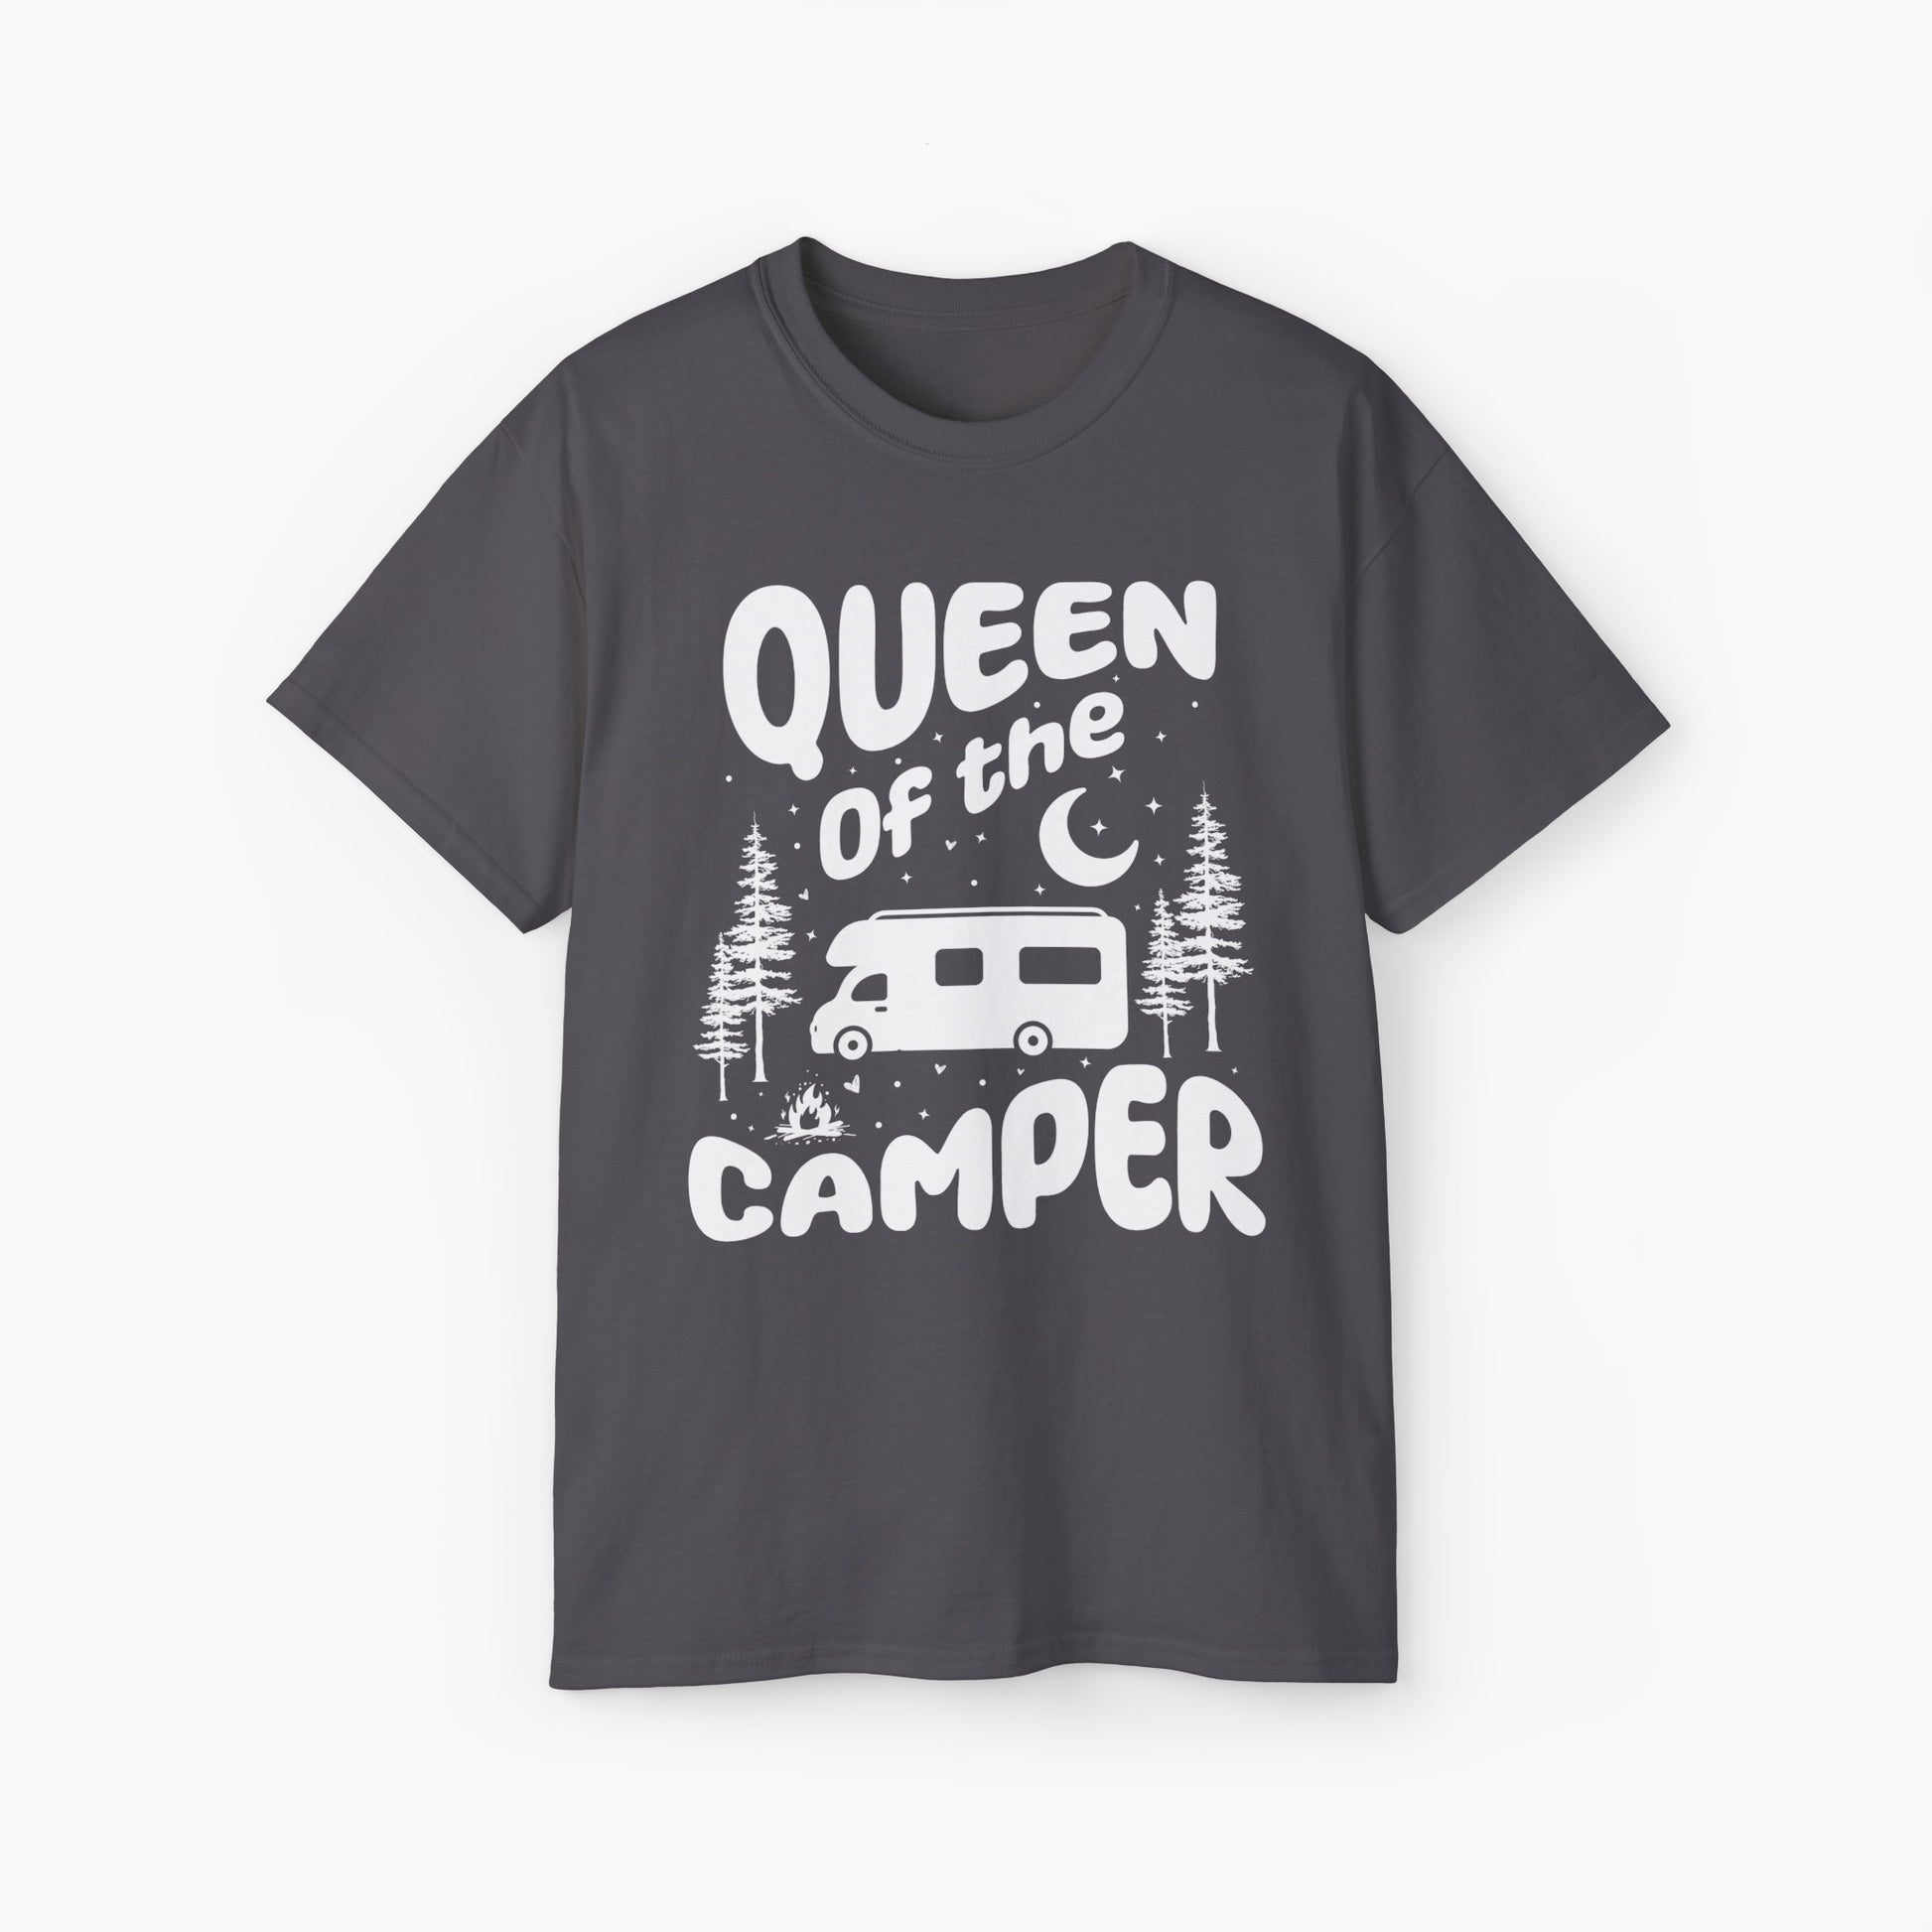 Dark grey t-shirt with 'Camping Queen' text, illustrated with a camping van, stars, trees, campfire, and moon, on a plain background.